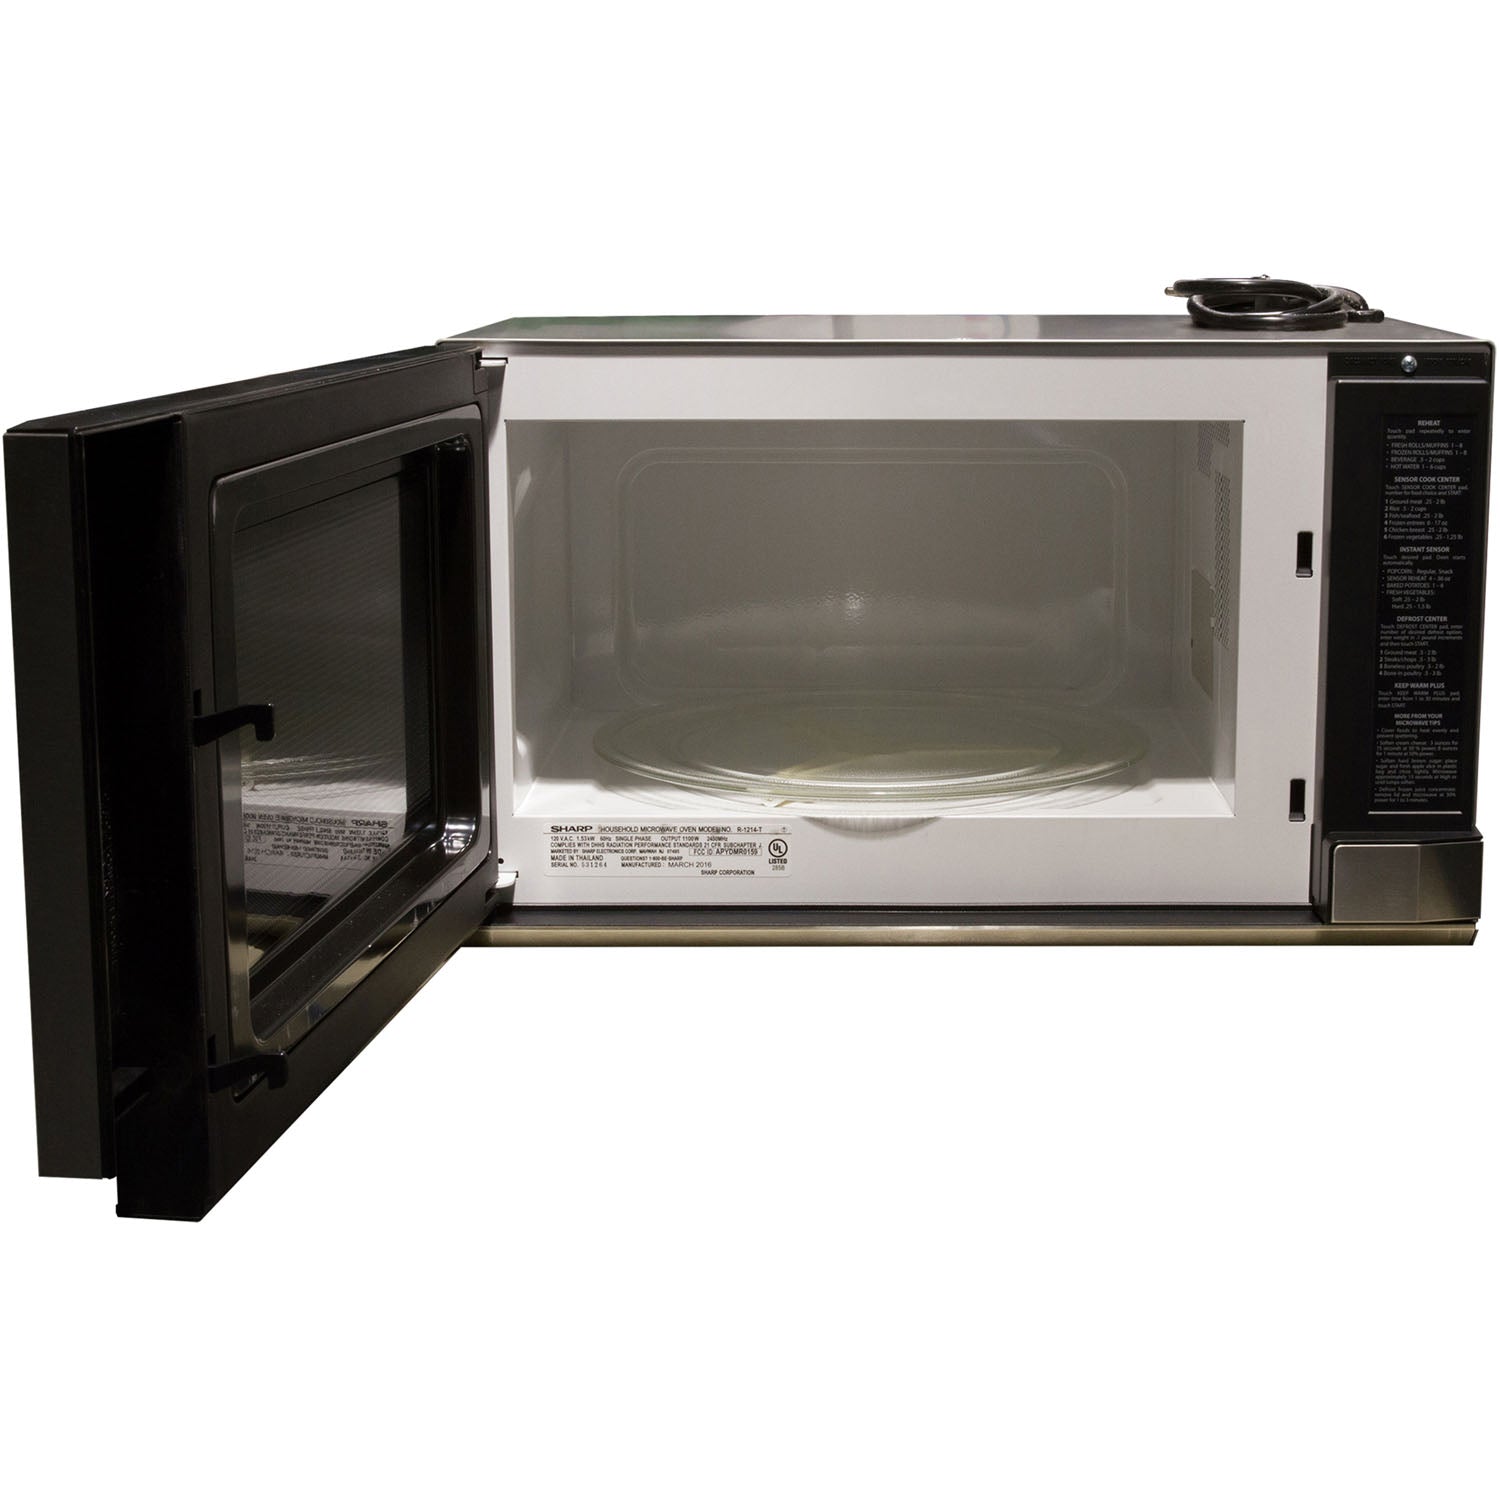 Sharp 1.5 cu. ft. 1100W 24 in. Over-the-Counter Microwave in Stainless Steel (R1214T)